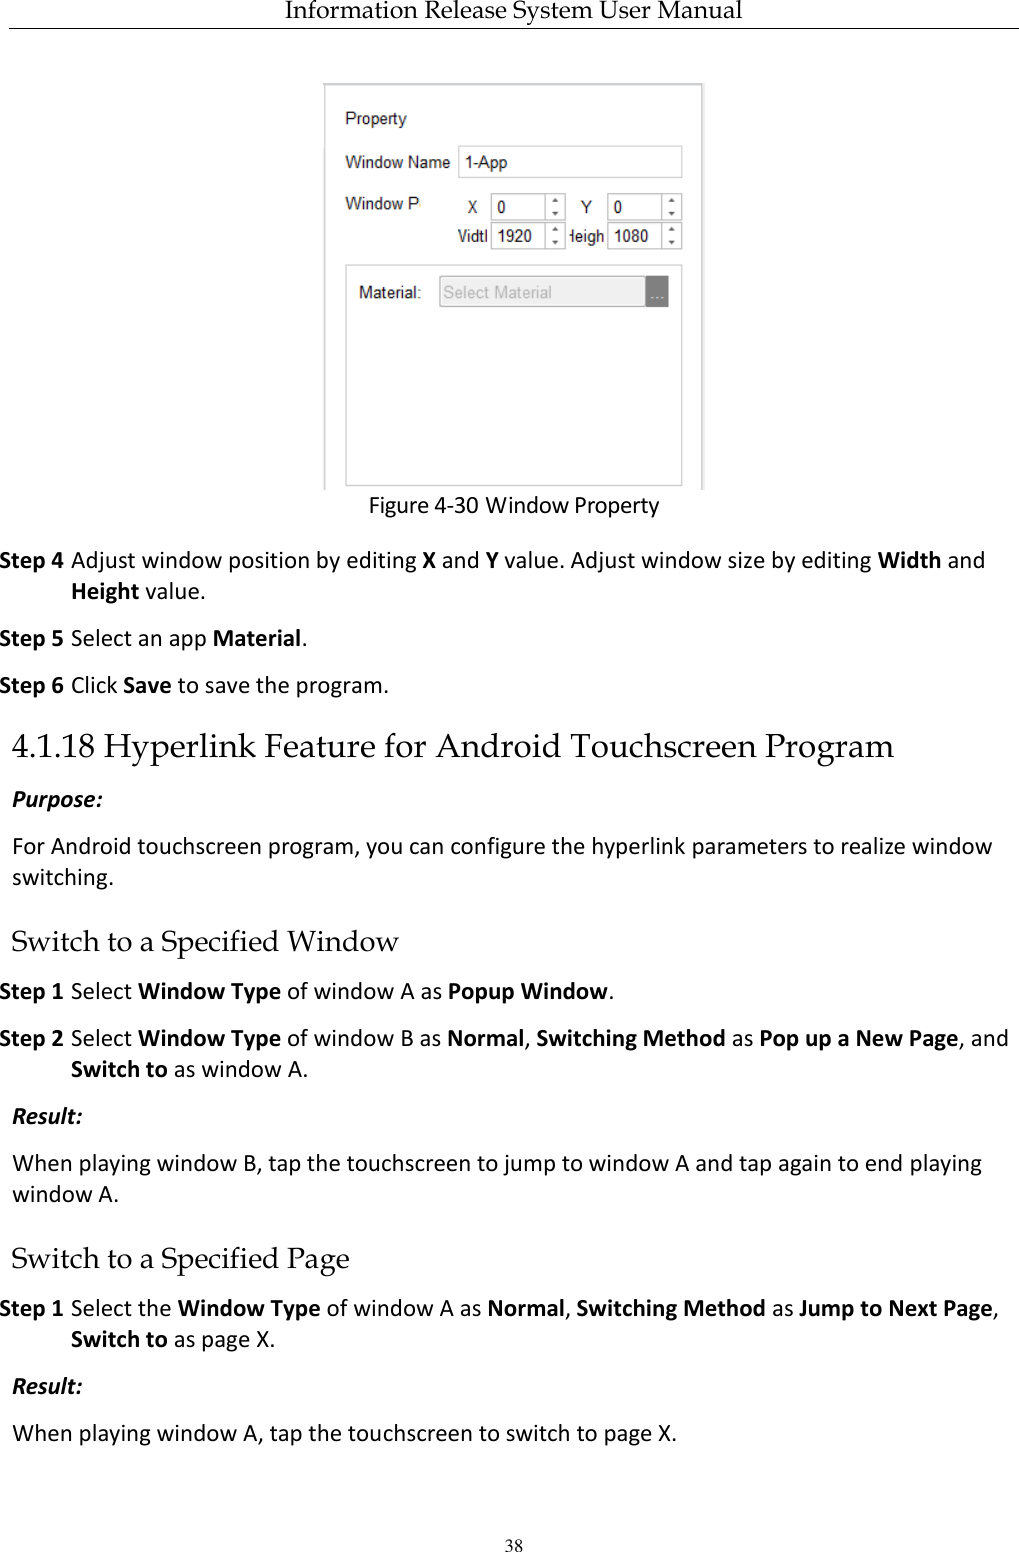 Information Release System User Manual 38  Figure 4-30 Window Property Step 4 Adjust window position by editing X and Y value. Adjust window size by editing Width and Height value. Step 5 Select an app Material. Step 6 Click Save to save the program. 4.1.18 Hyperlink Feature for Android Touchscreen Program Purpose: For Android touchscreen program, you can configure the hyperlink parameters to realize window switching.   Switch to a Specified Window Step 1 Select Window Type of window A as Popup Window. Step 2 Select Window Type of window B as Normal, Switching Method as Pop up a New Page, and Switch to as window A. Result: When playing window B, tap the touchscreen to jump to window A and tap again to end playing window A. Switch to a Specified Page Step 1 Select the Window Type of window A as Normal, Switching Method as Jump to Next Page, Switch to as page X. Result: When playing window A, tap the touchscreen to switch to page X. 